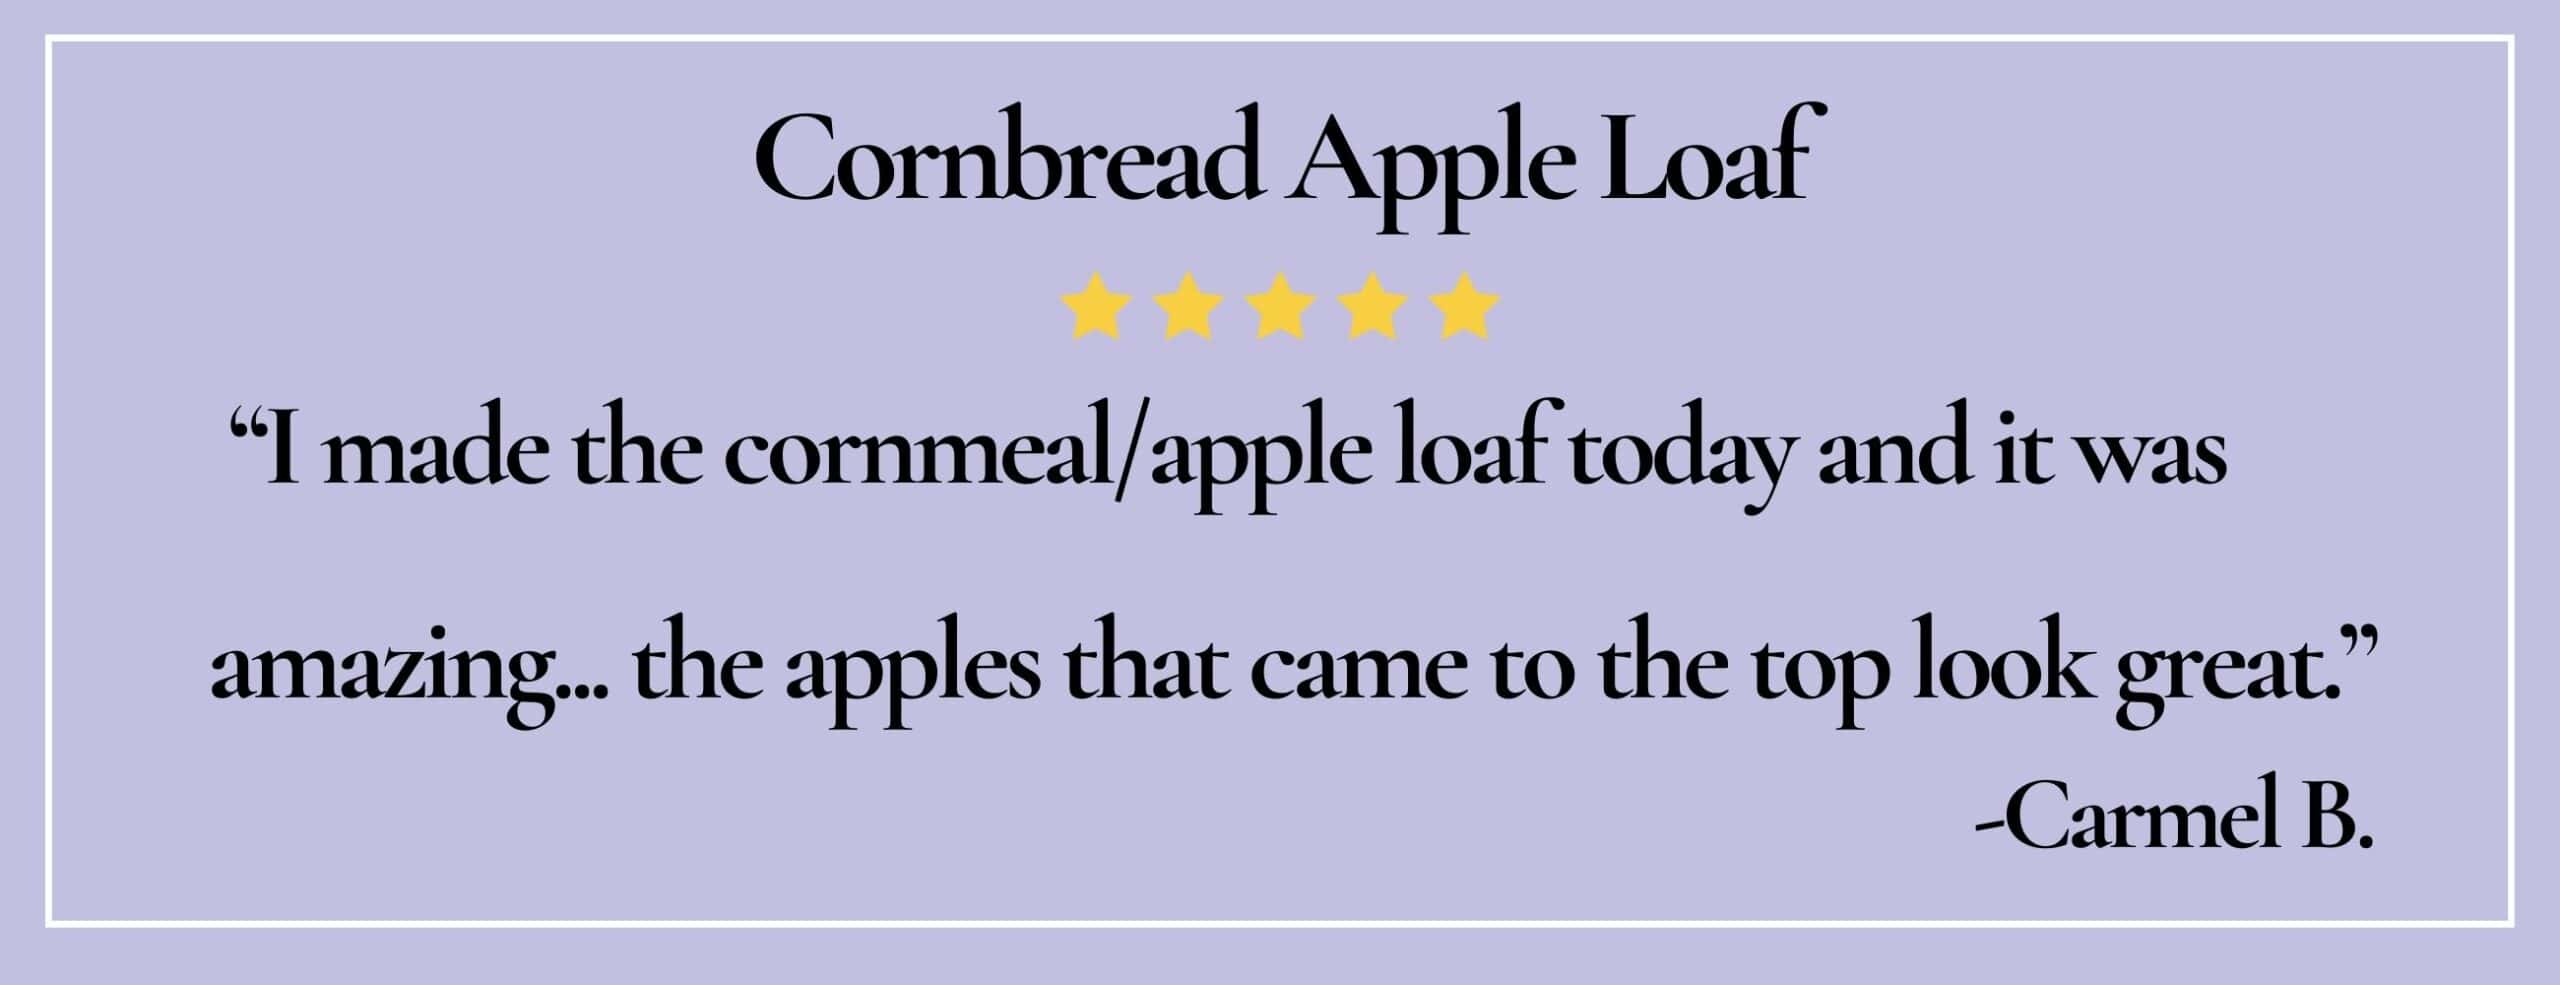 text box with paraphrase: I made the cornmeal/apple loaf today and it was amazing...The apples look great. -Carmel